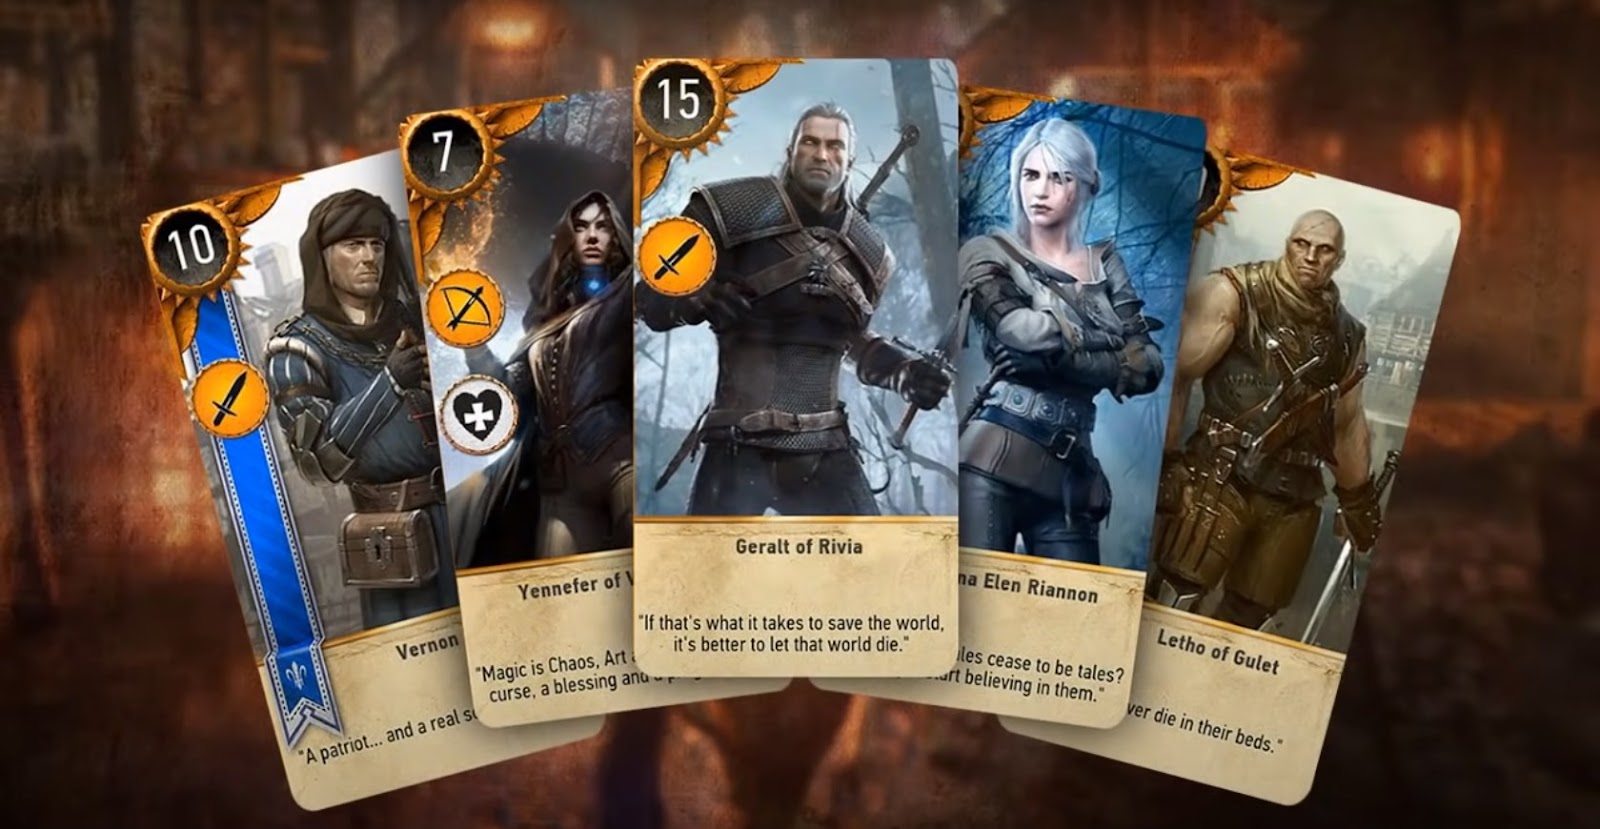 various characters from the Witcher series